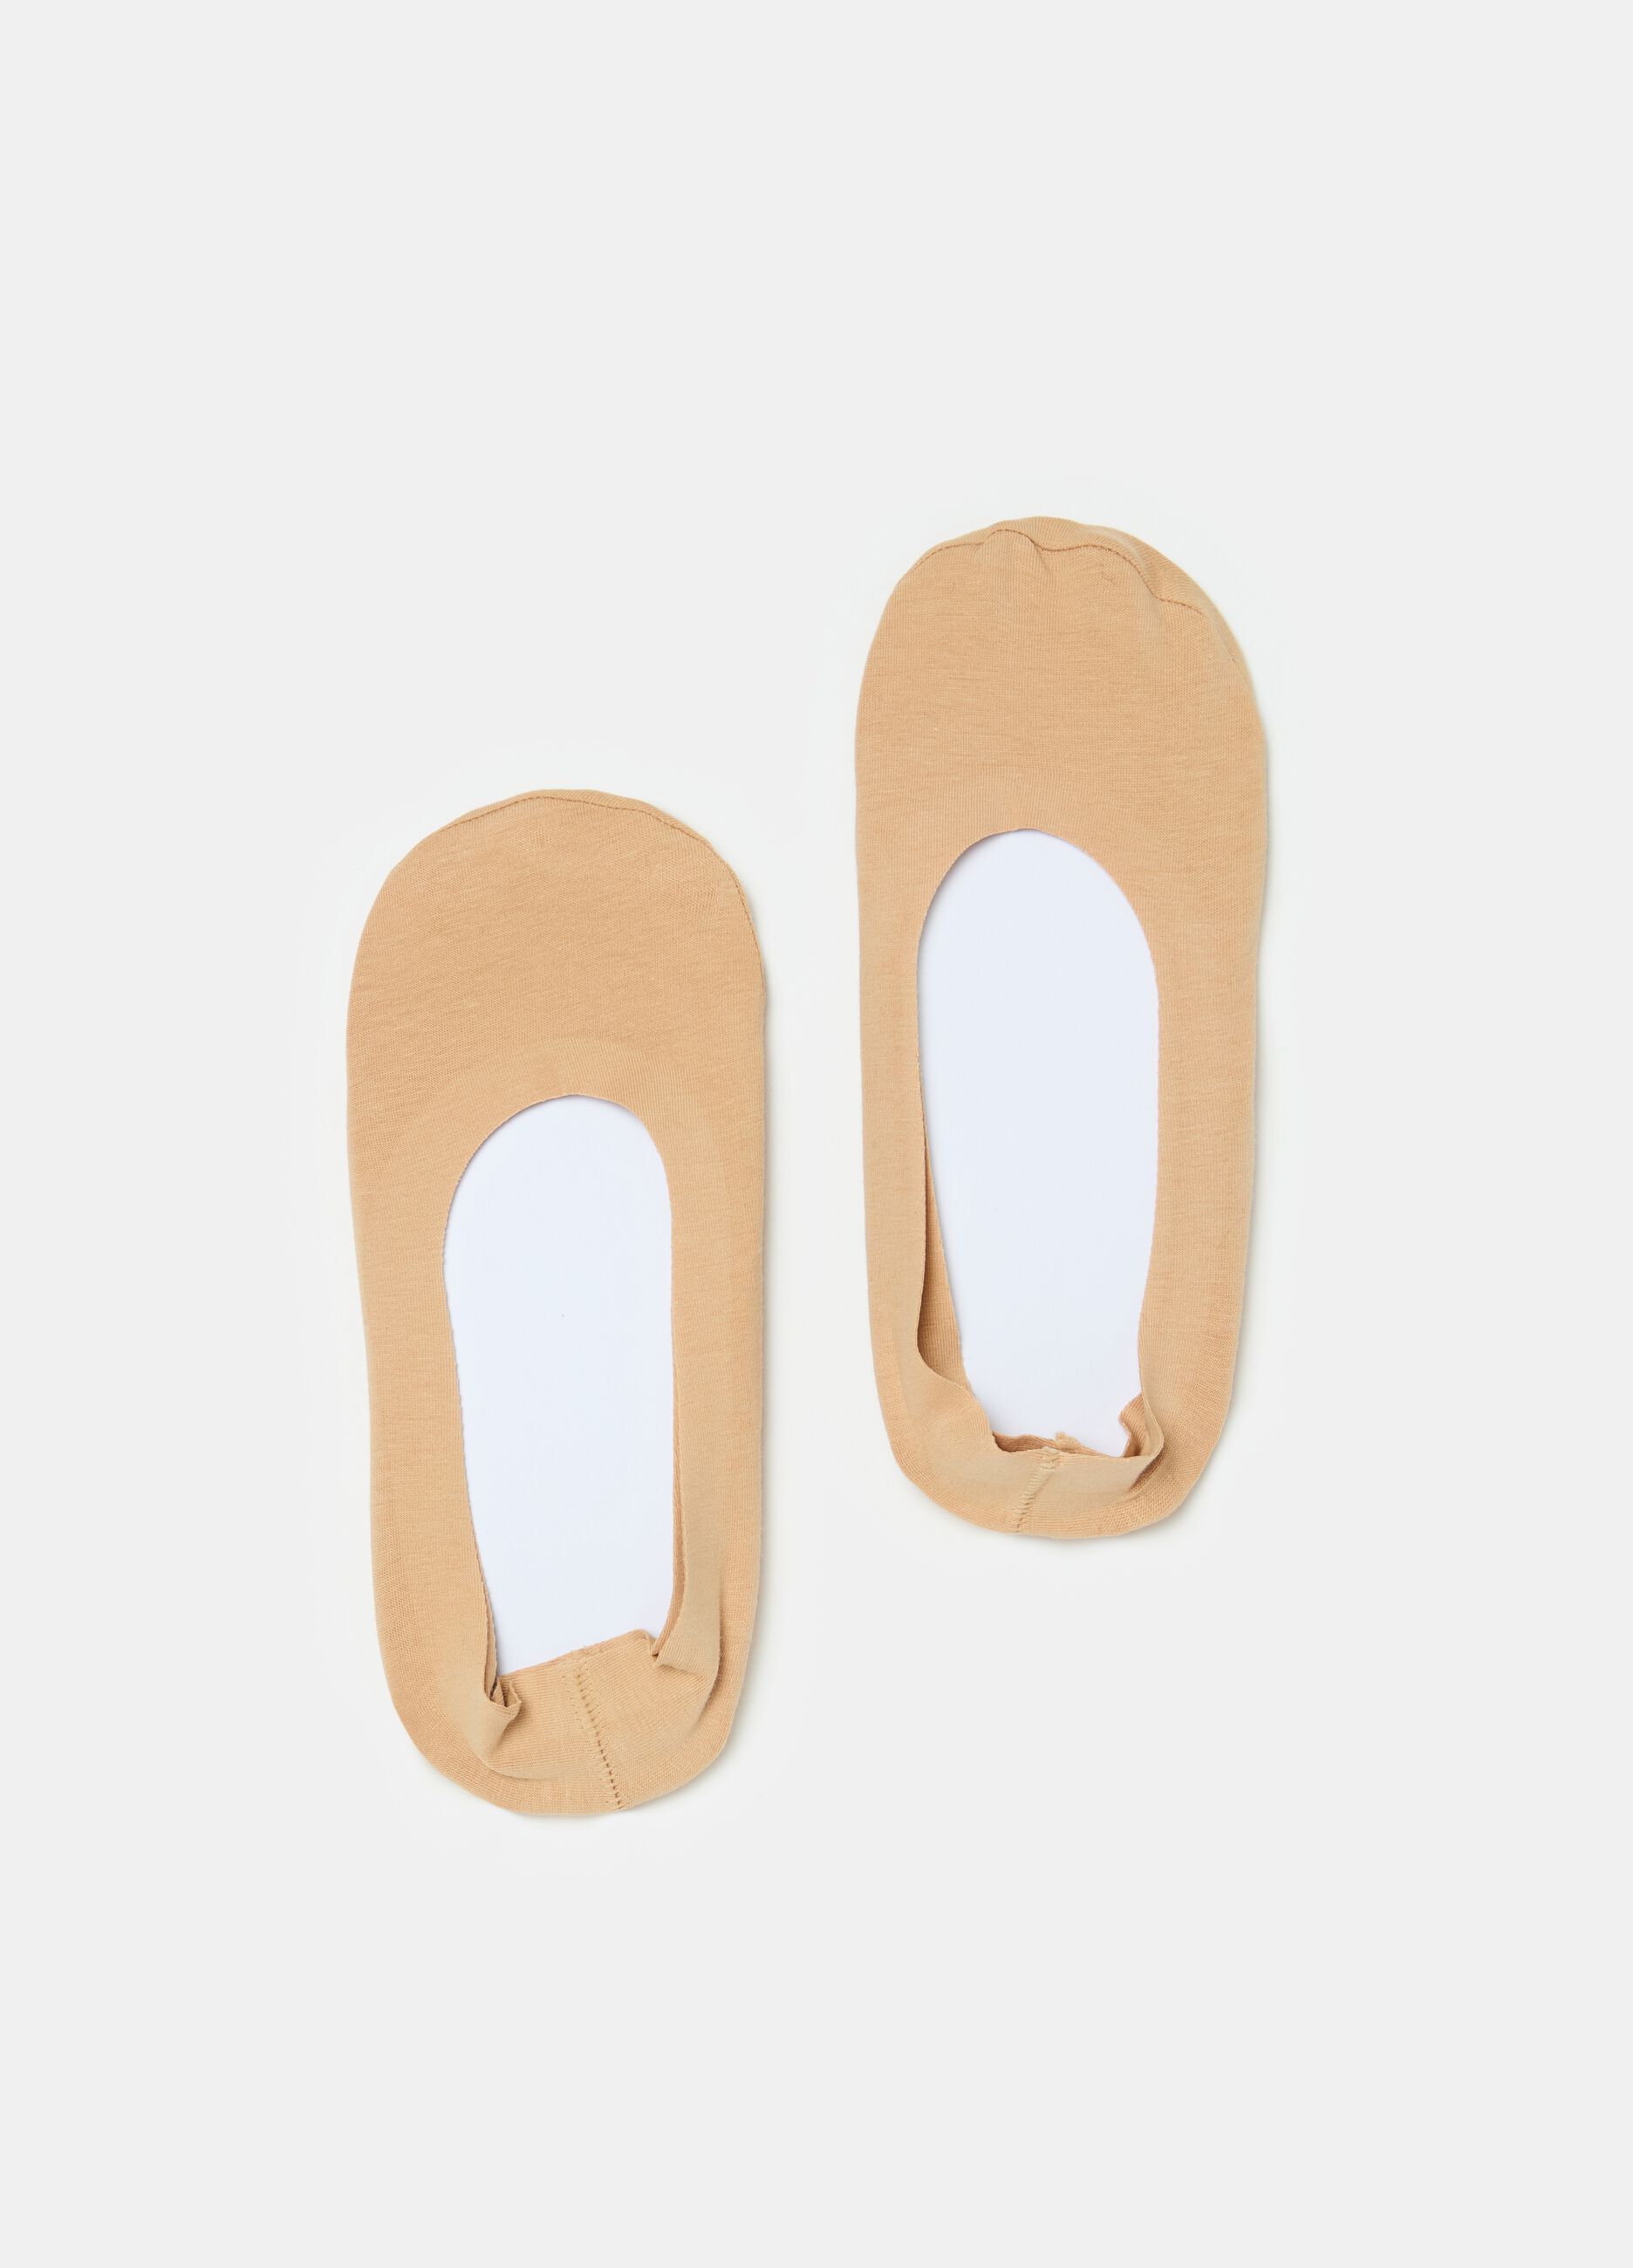 Two-pair pack shoe liners in stretch cotton